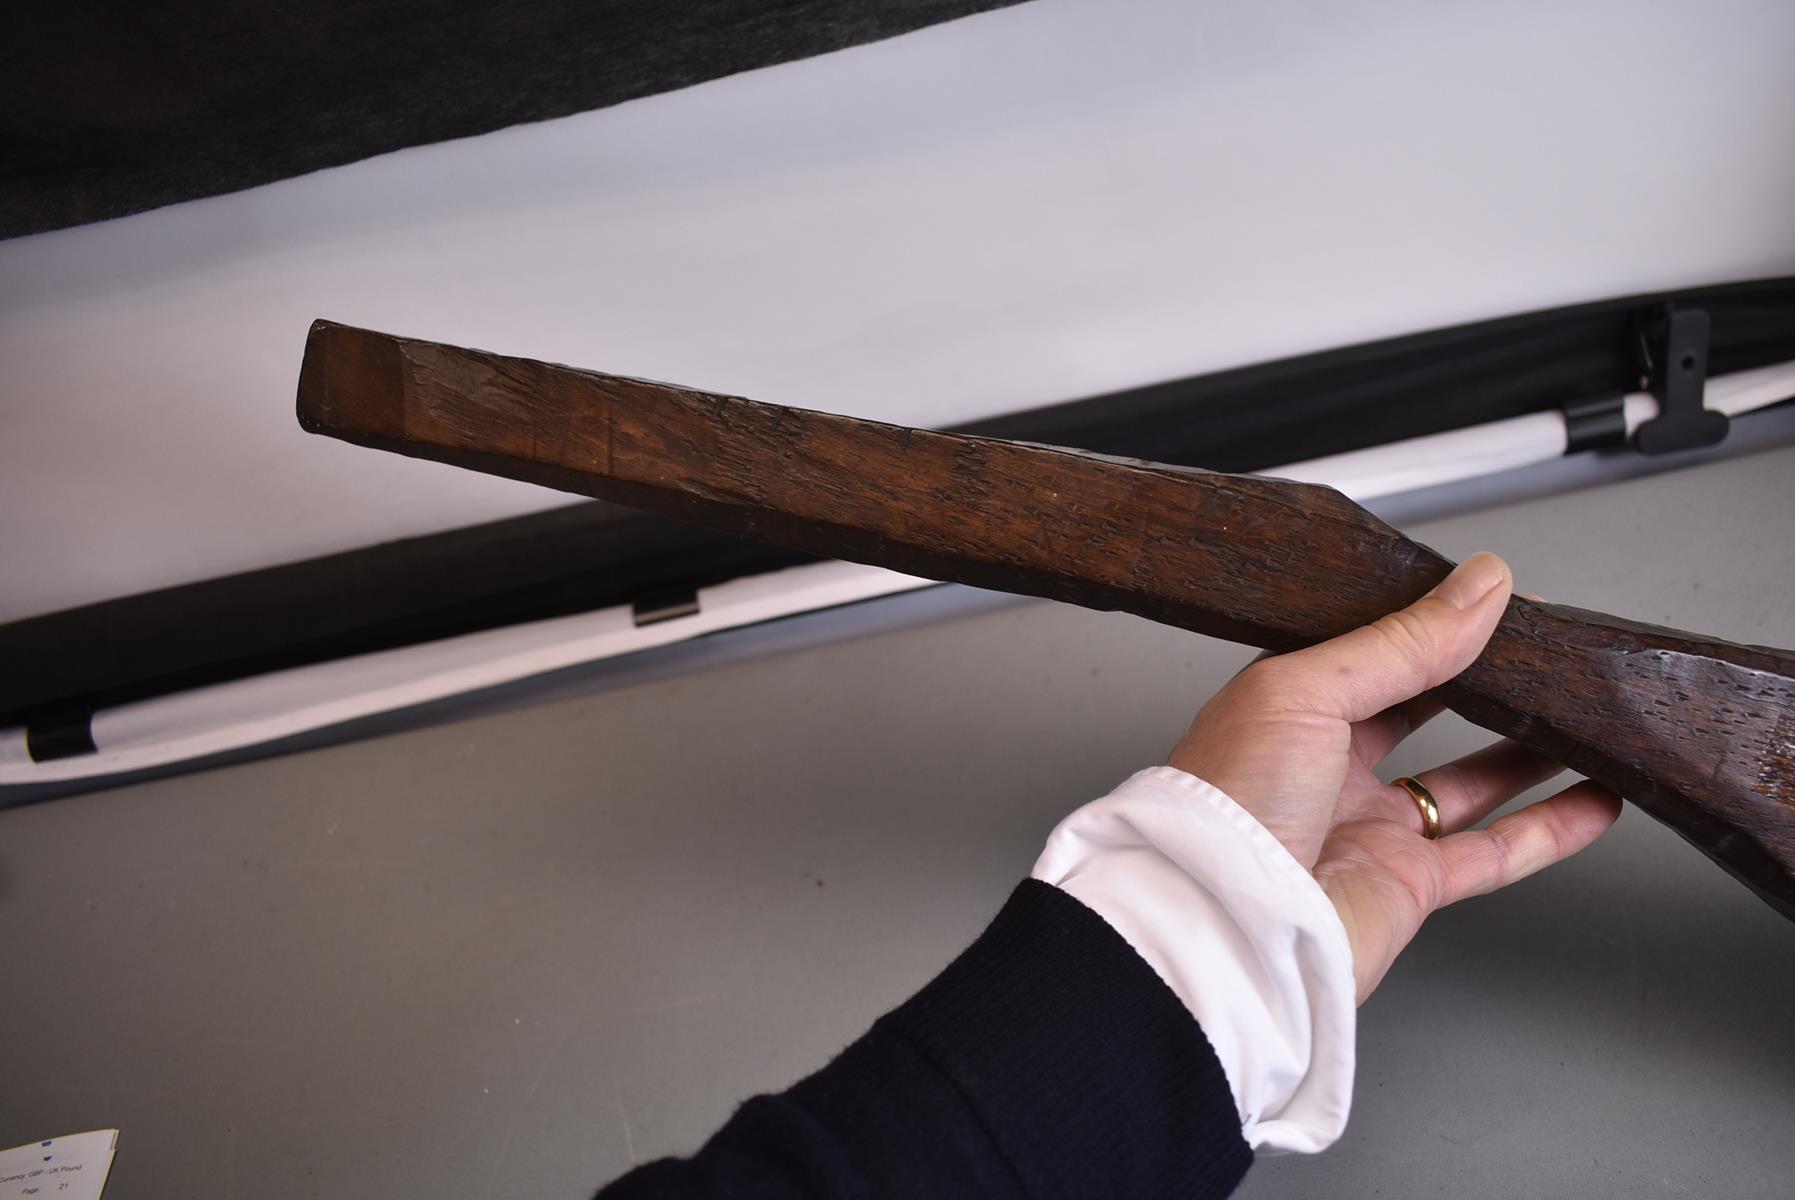 A 19TH CENTURY ROUGH HEWN GUN STOCK, of burr maple. - Image 8 of 10